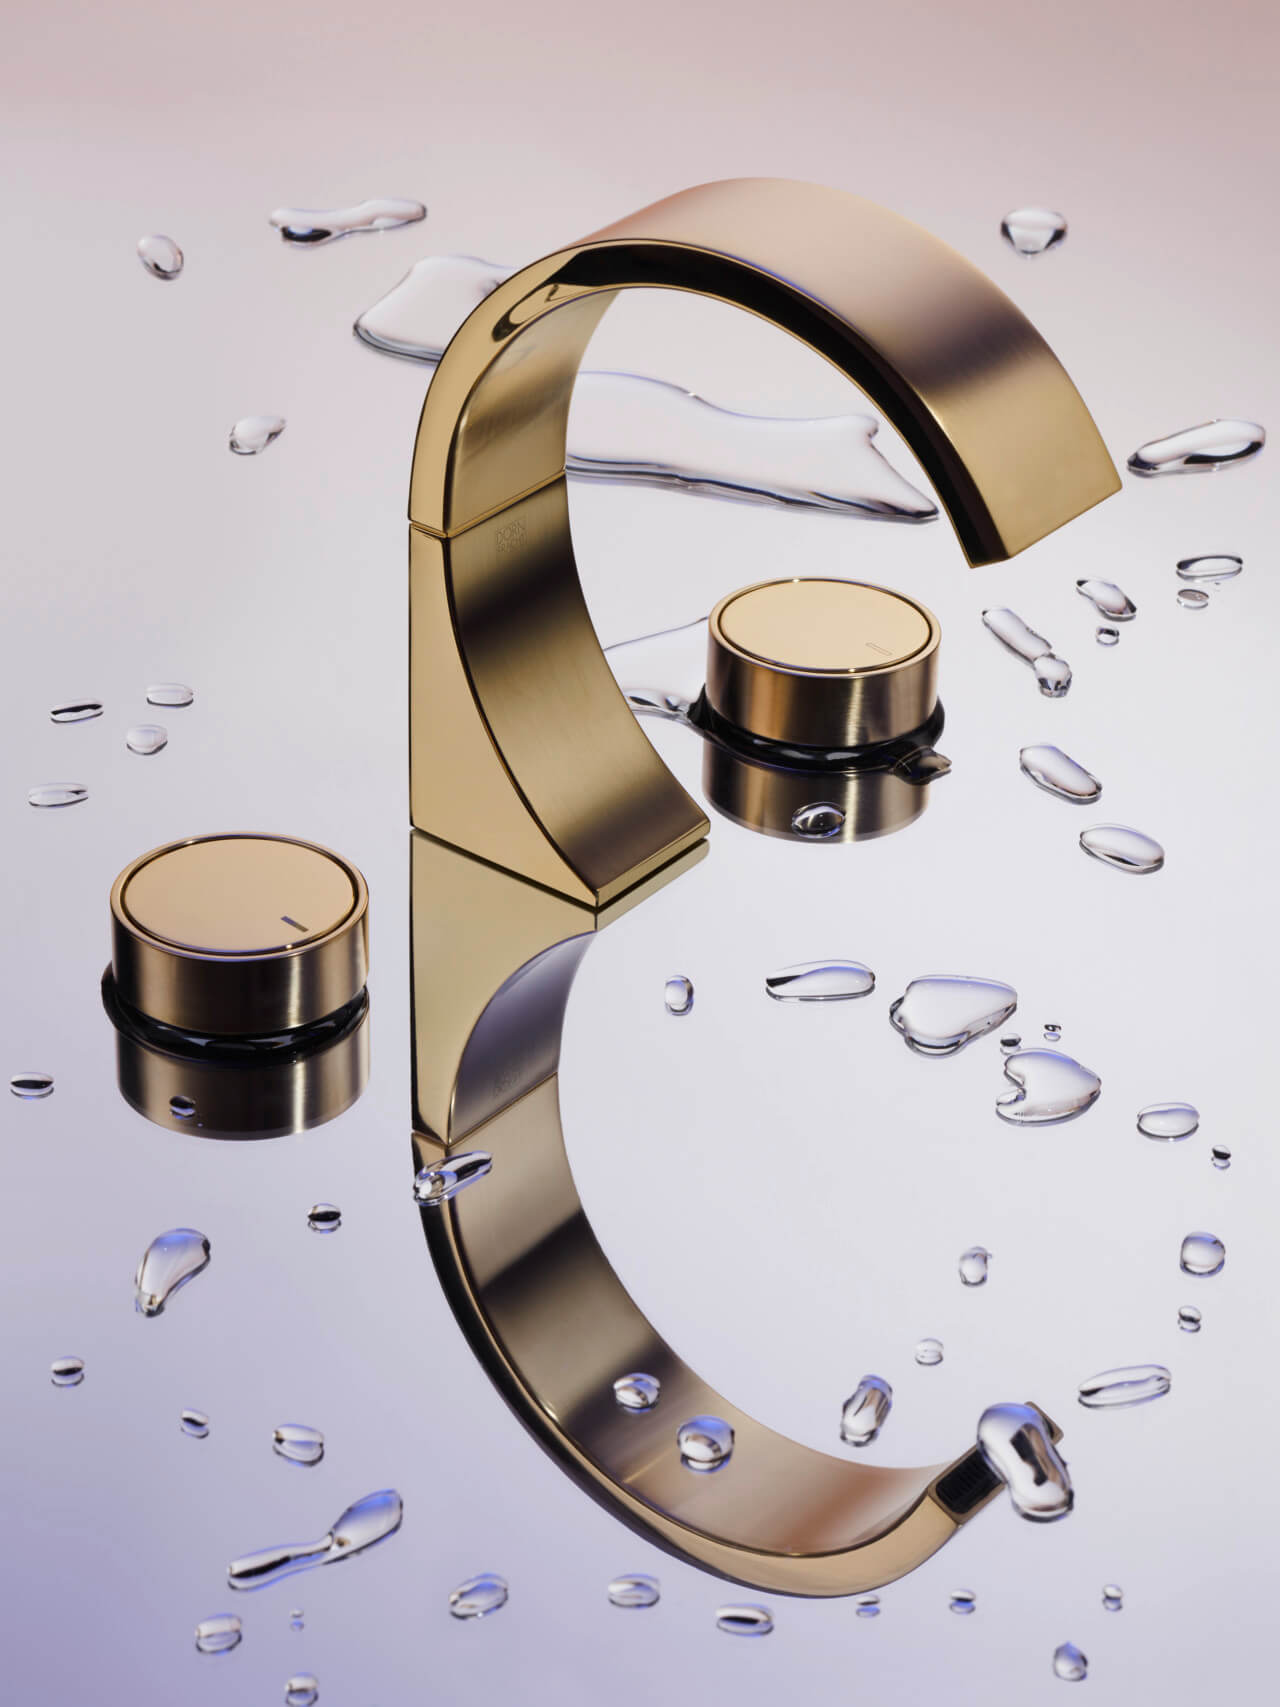 a gold curved faucet and round knobs on a reflective surface